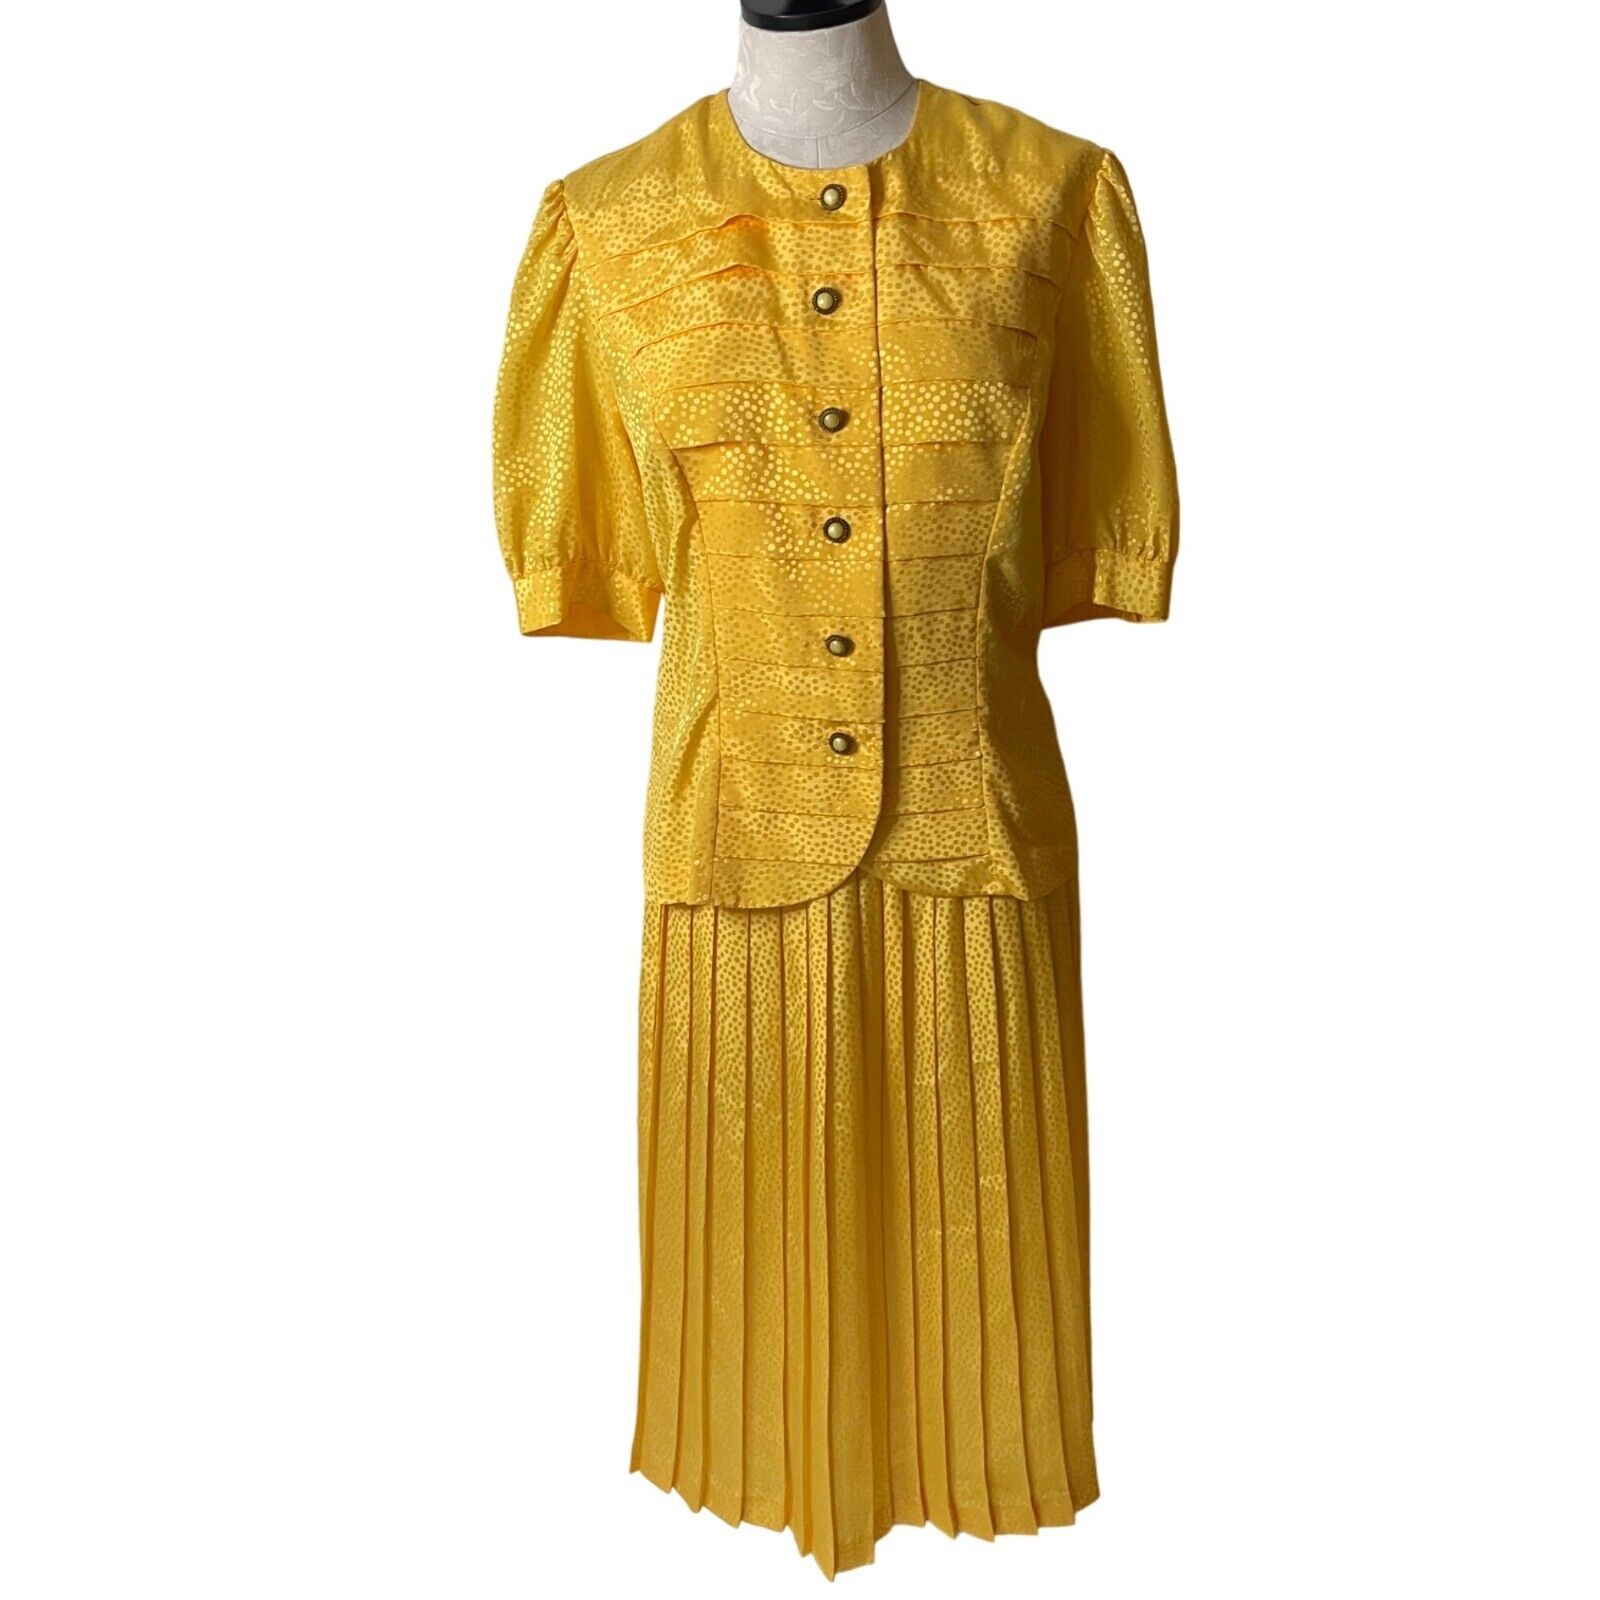 Andrea Gayle Skirt Set Womens Size 10 Vintage Pleated Yellow Polka Dot